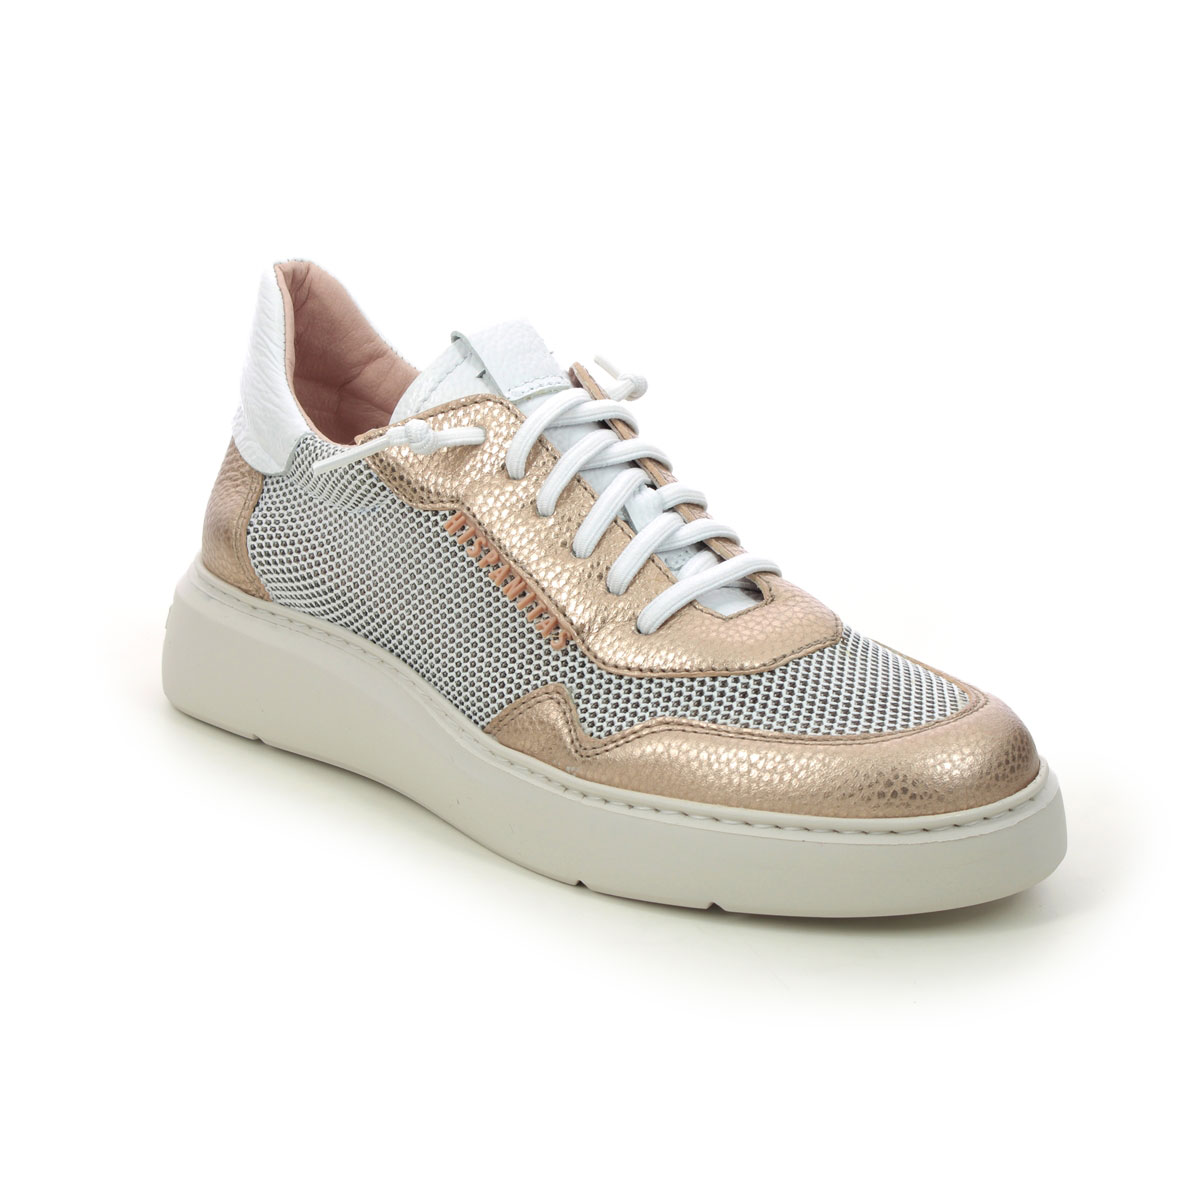 Hispanitas Oceania Wedge Gold Womens trainers HV243412-B02 in a Plain Leather and Textile in Size 38